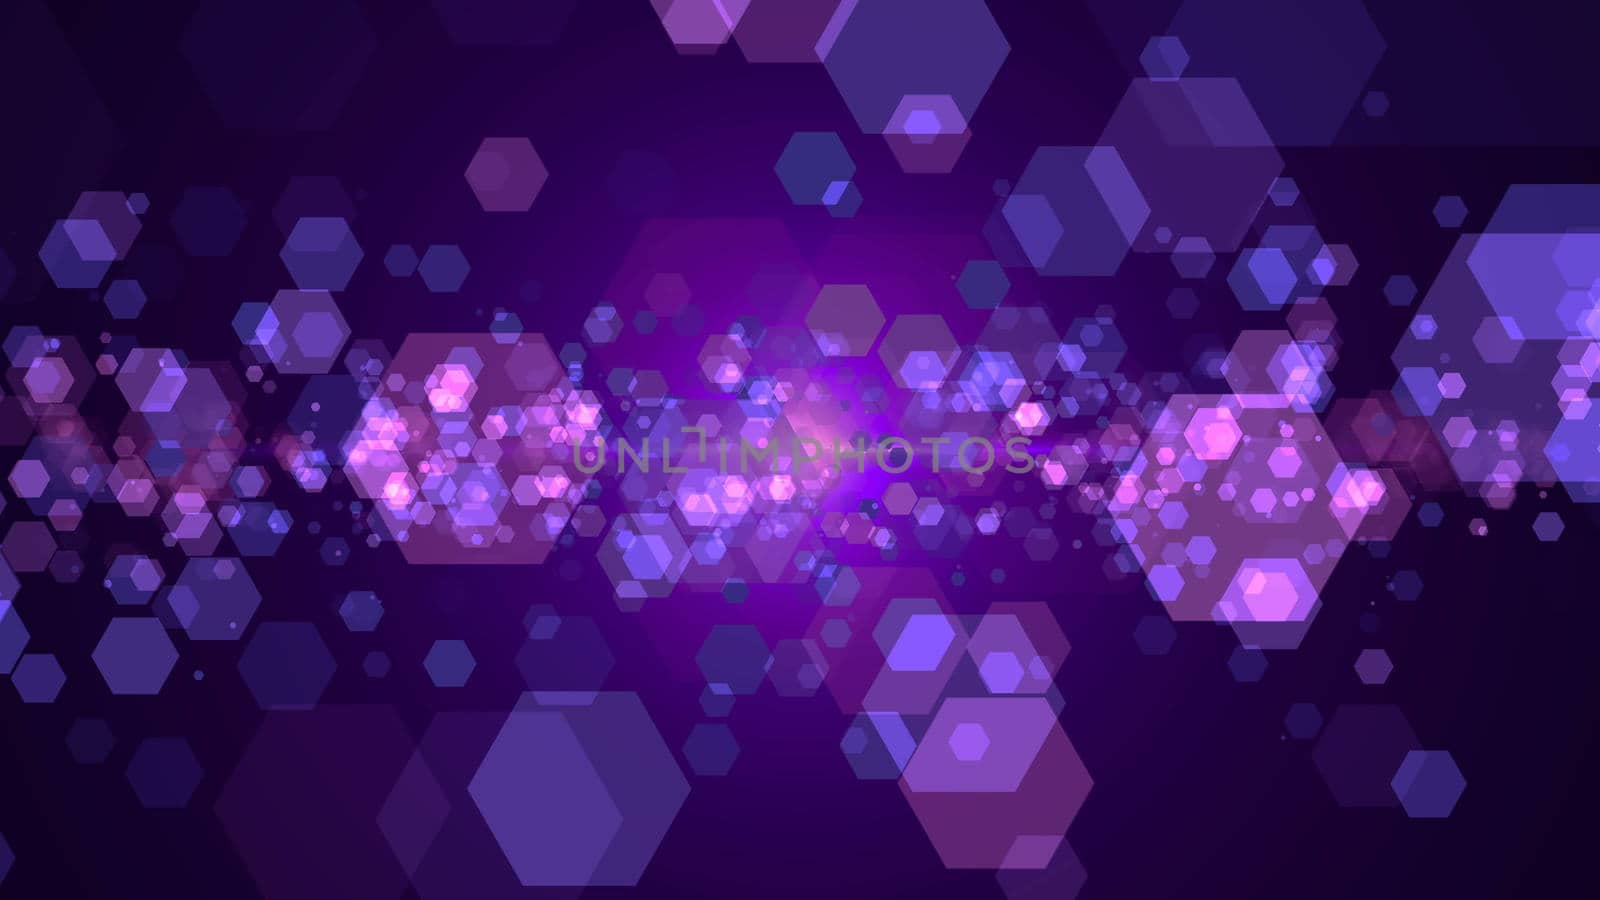 Hexagonal abstract background. Digital illustration by nolimit046